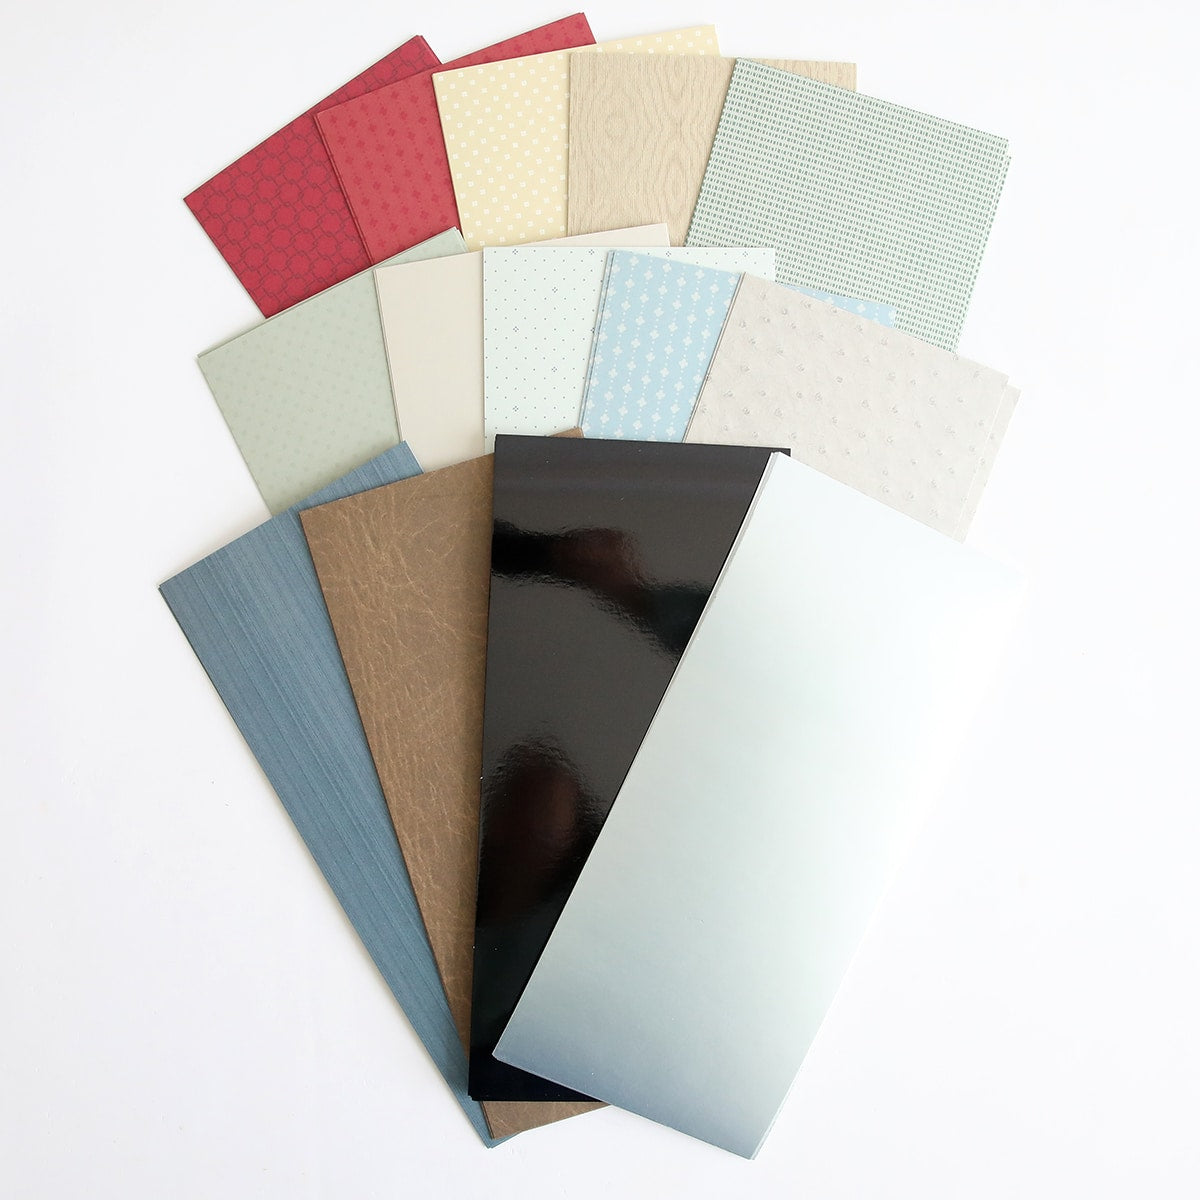 A pile of Classic Car Cardstock in different colors on a white surface.